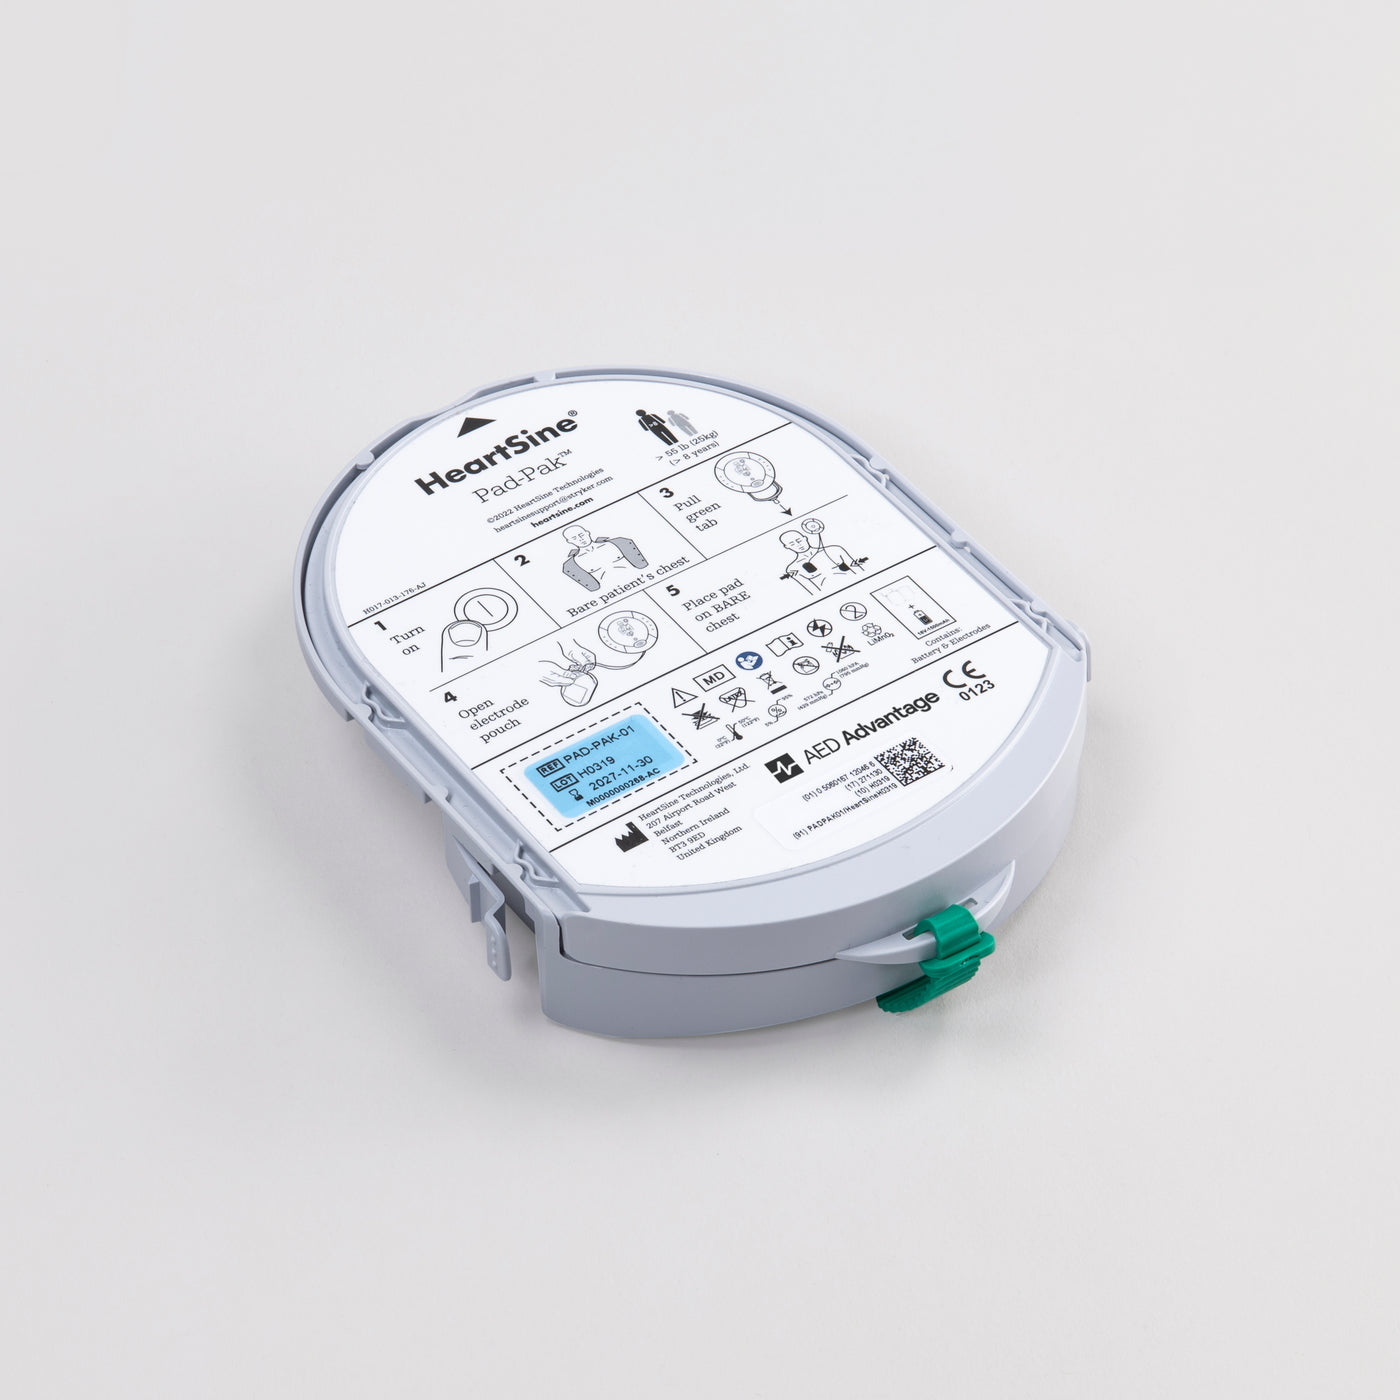 White adult pads and battery cartridge for the HeartSine defibrillator